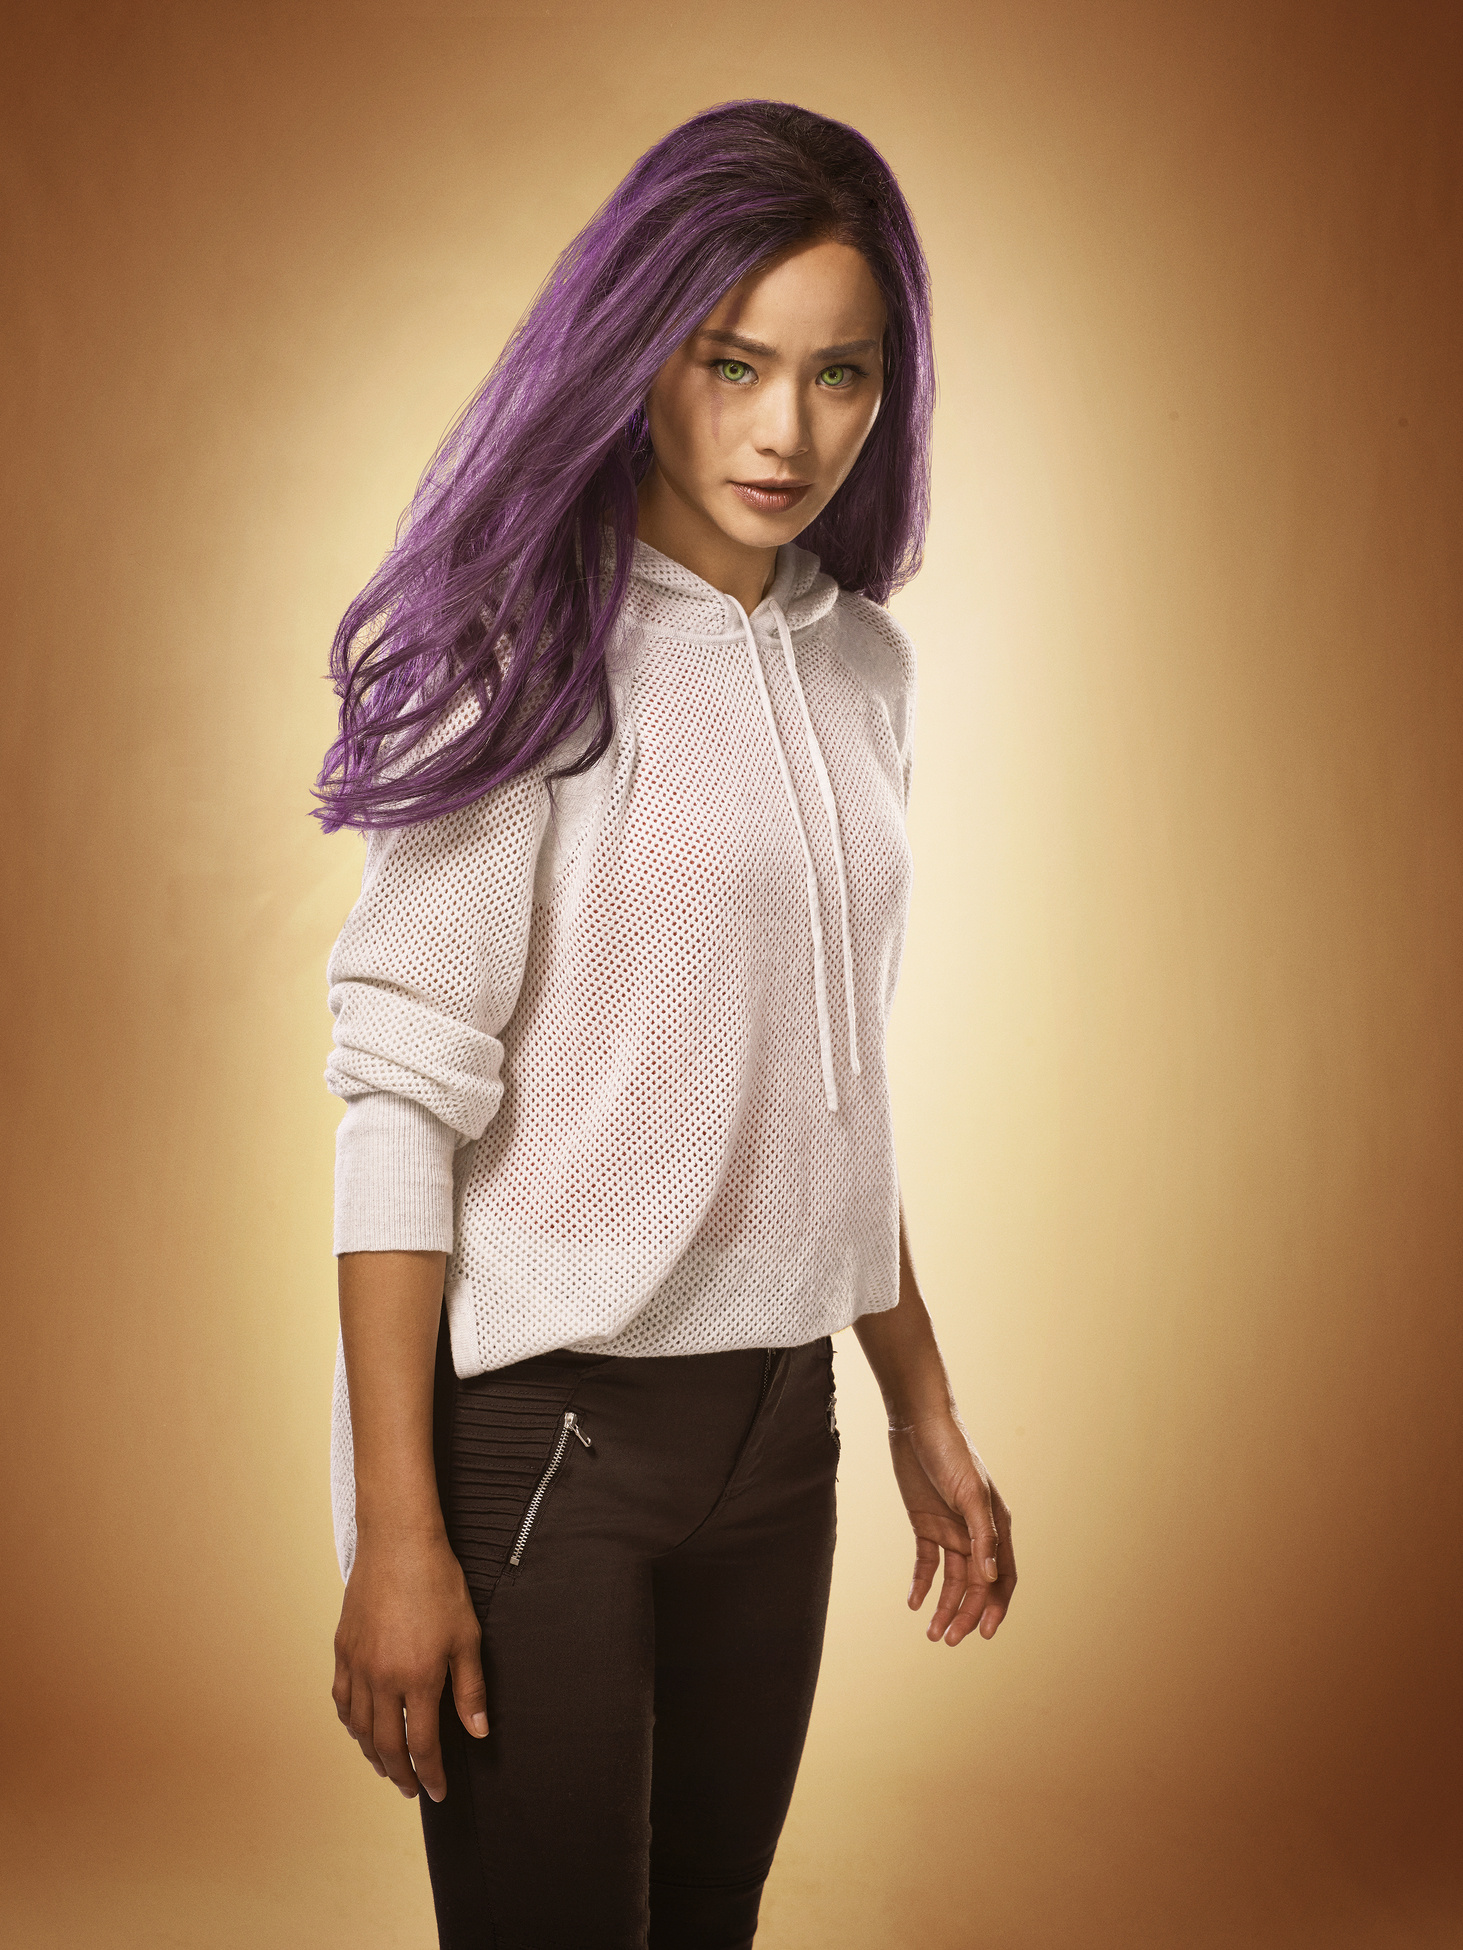 The Gifted TV series, Blink wallpapers, Exciting visuals, Superhuman powers, 1470x1950 HD Handy